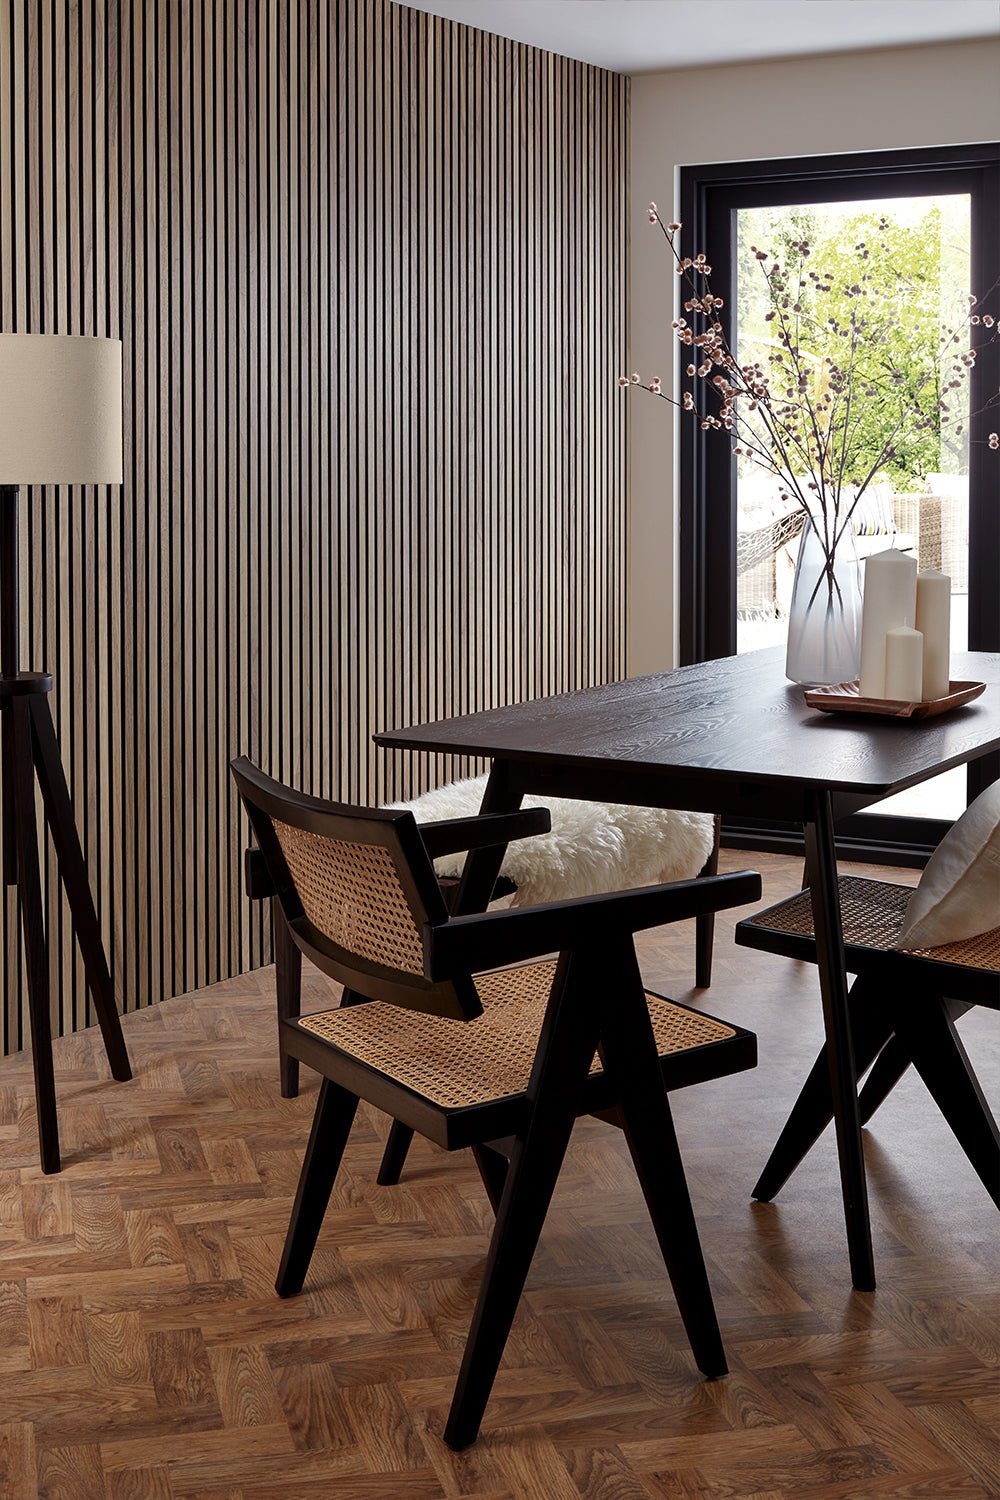 Walnut Acoustic SlatWall Panels from Naturewall in a dining room setting. 